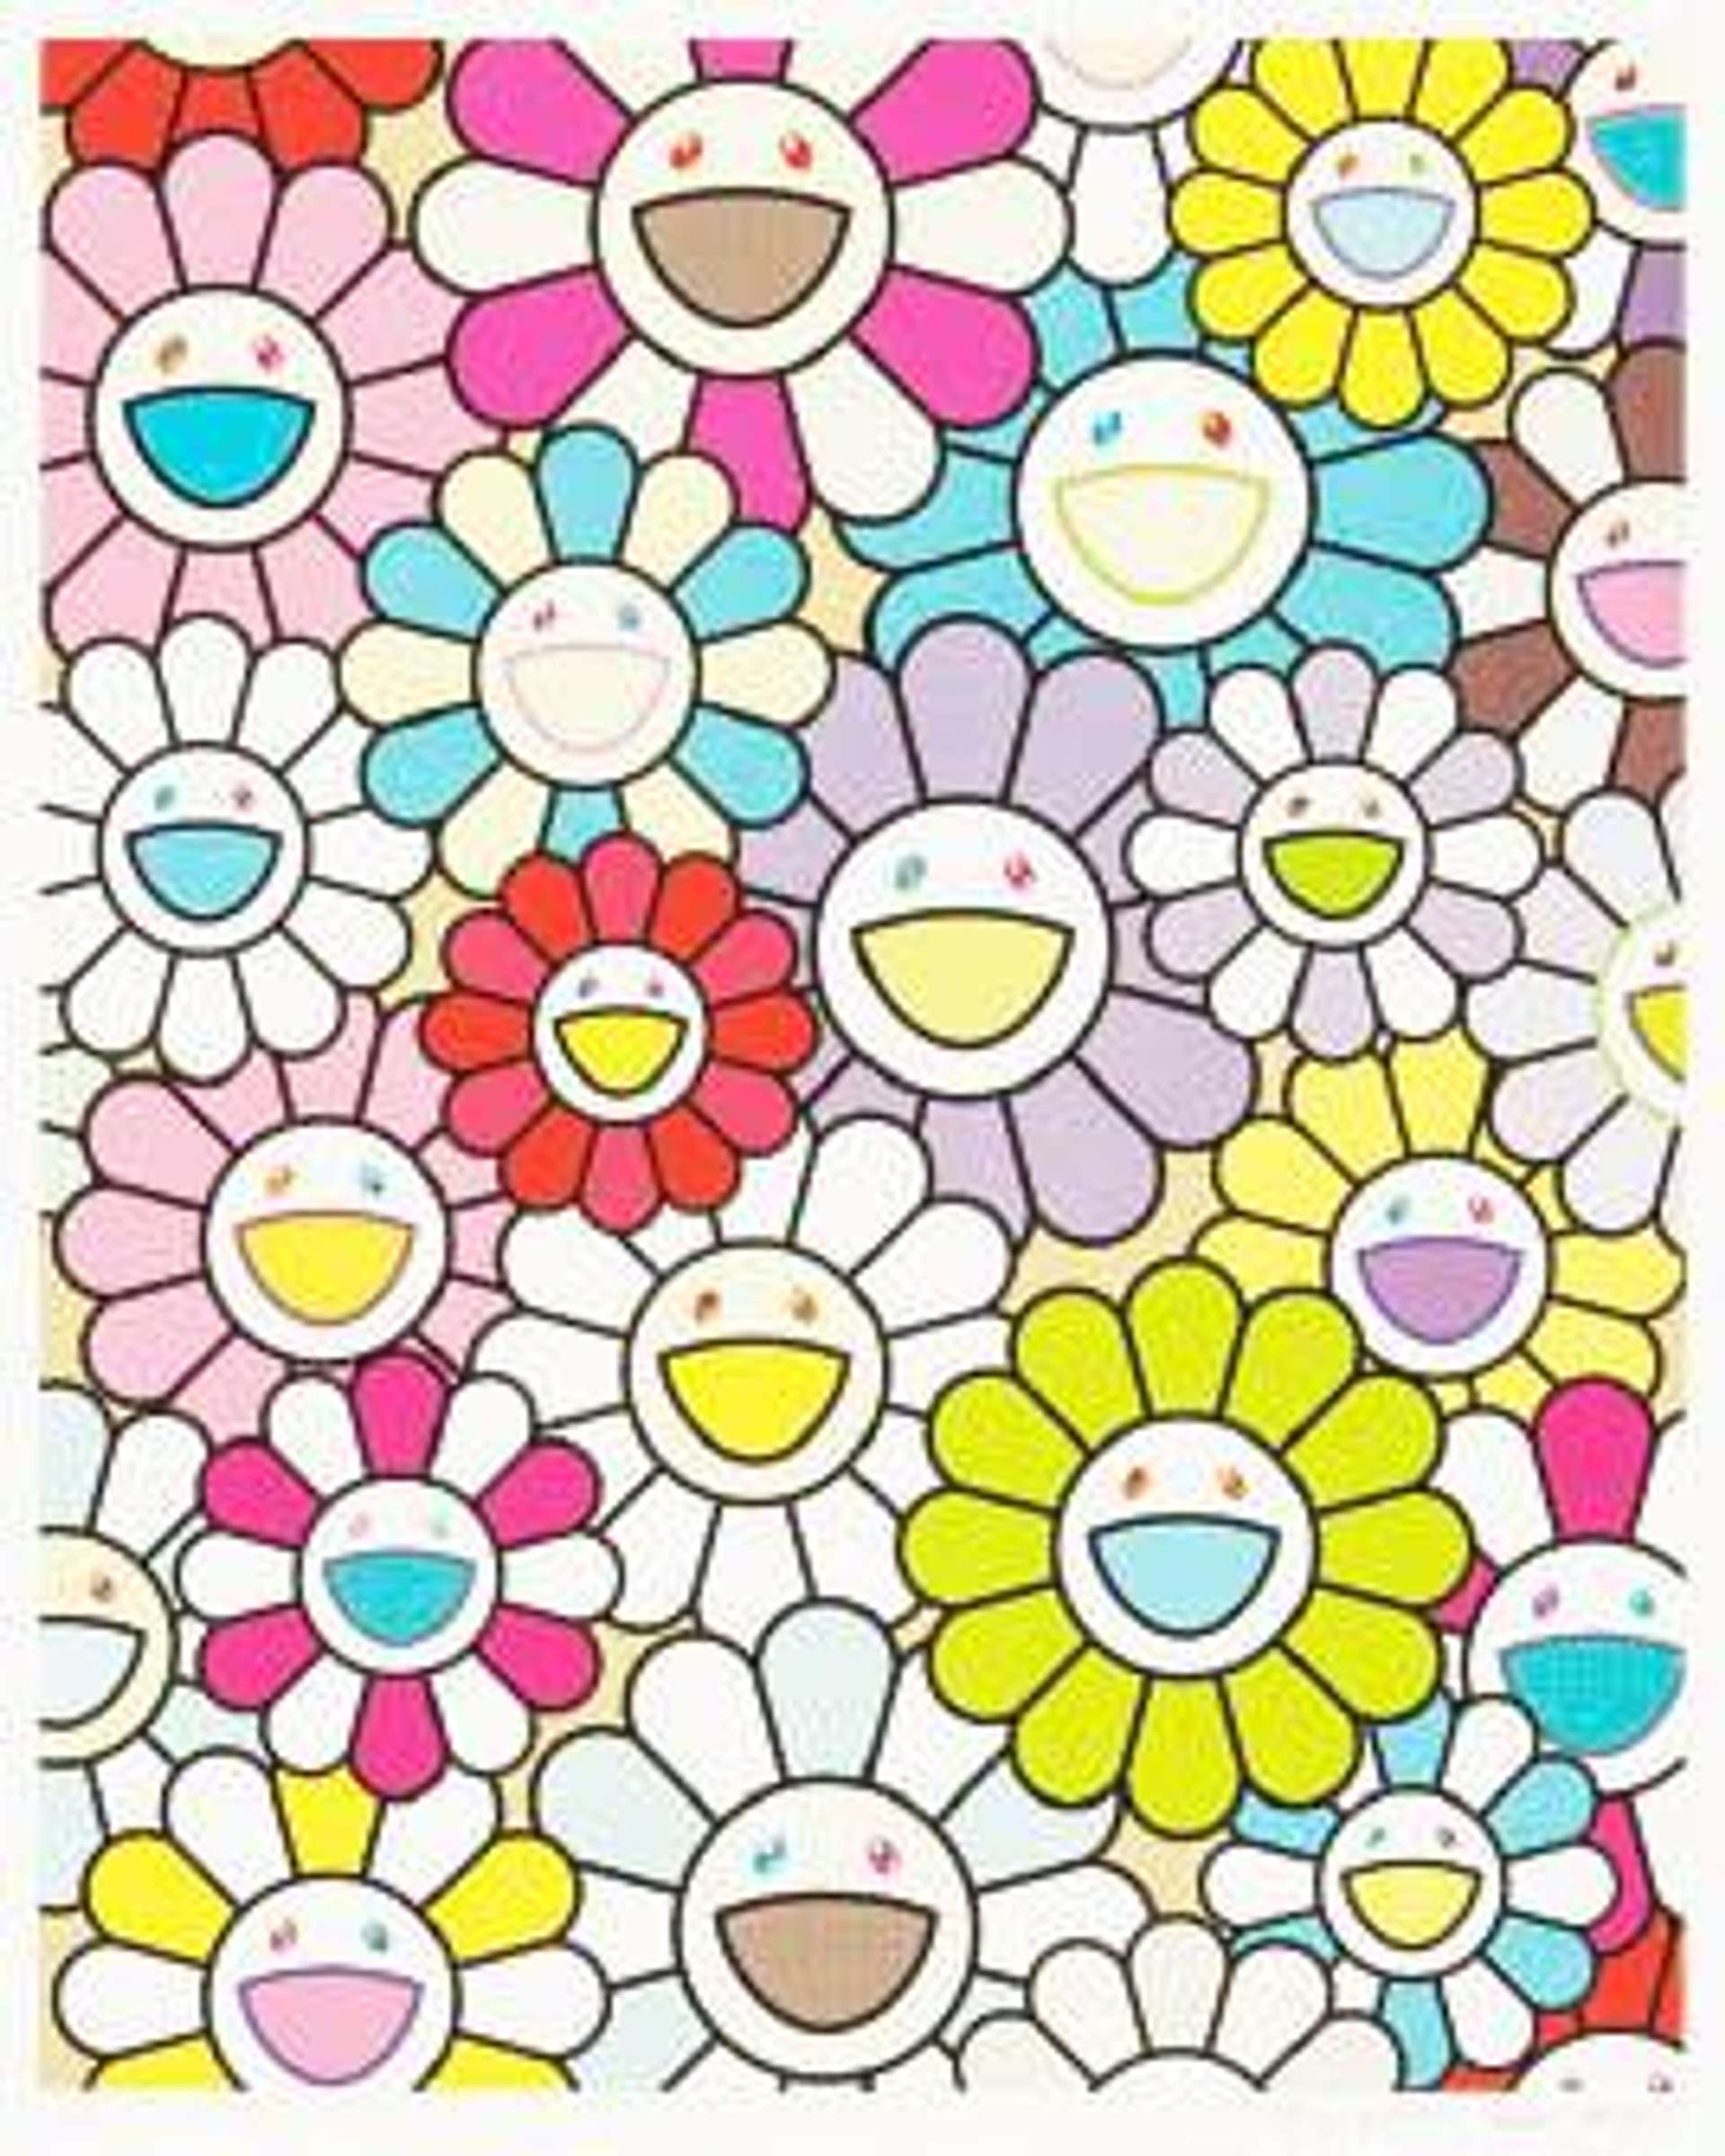 A Little Flower Painting (yellow, white and purple flowers) - Signed Print by Takashi Murakami 2018 - MyArtBroker